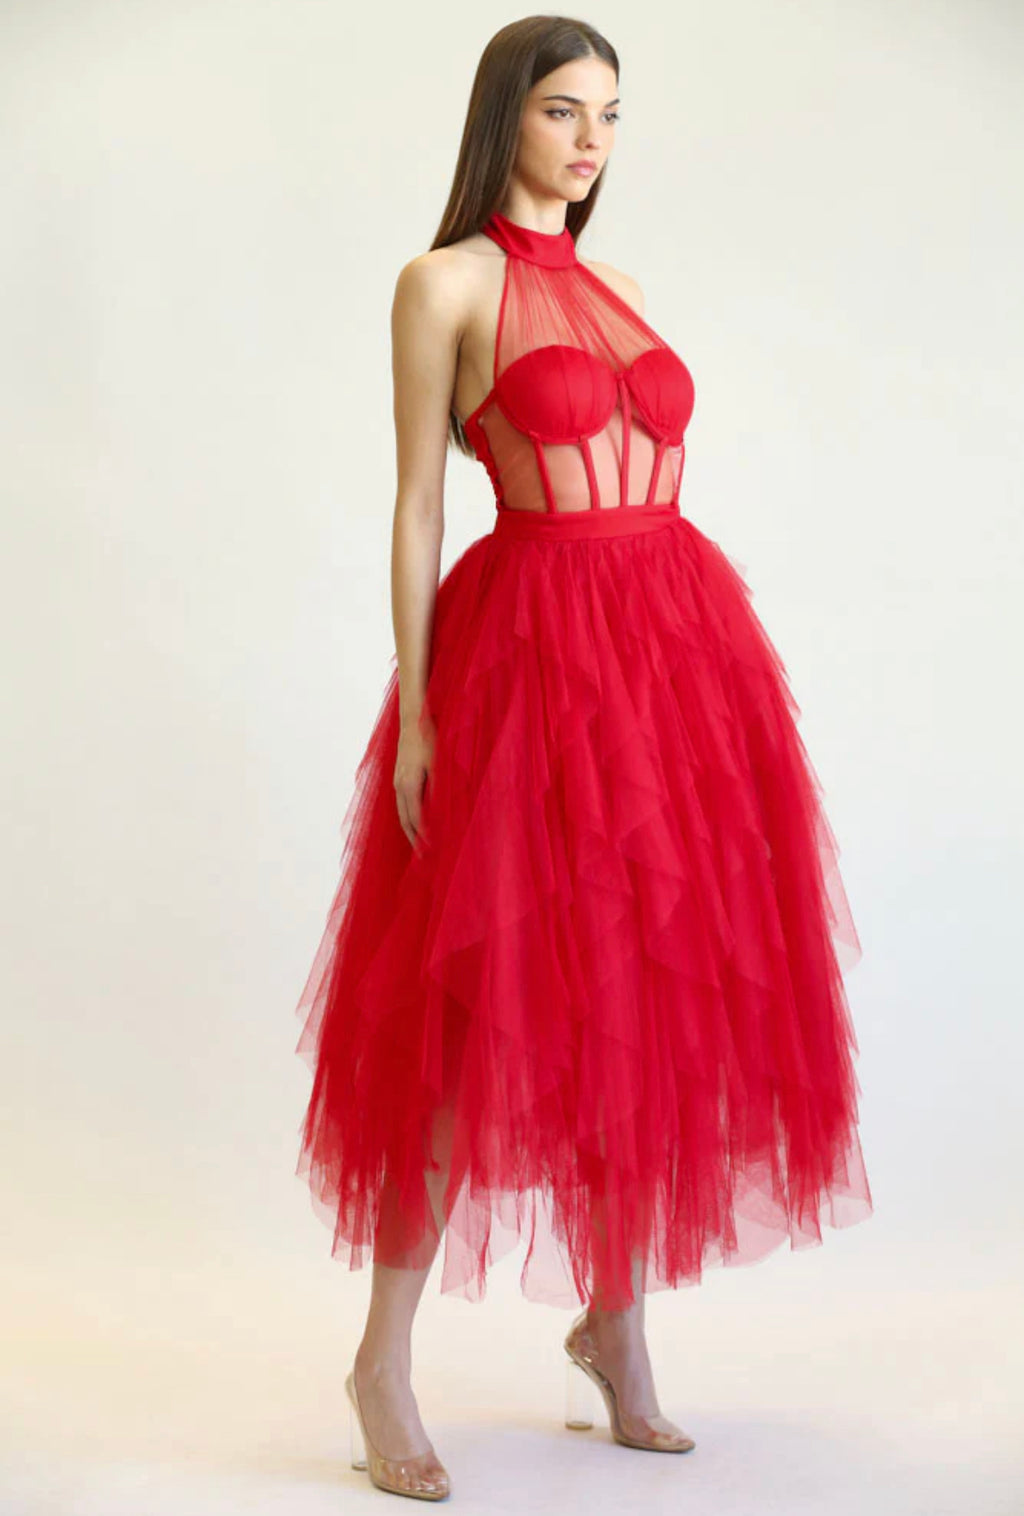 Goddess Red Tulle Special Occassion Dress